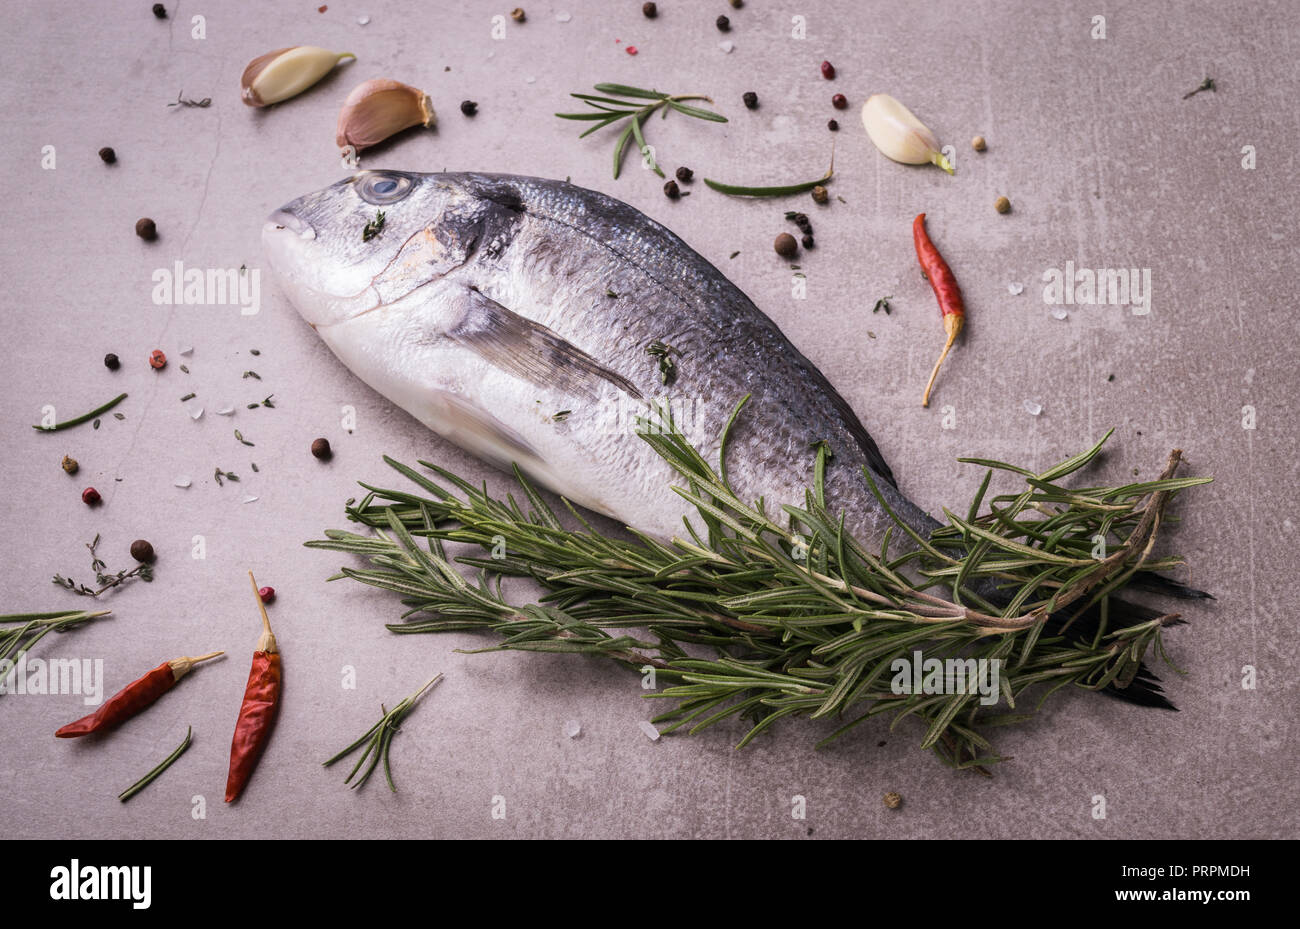 Fresh dorado fish. Dorado and cooking ingredients - rosemary, spices, garlic, thyme, herbs. Cooking concept. On light stone background. Stock Photo